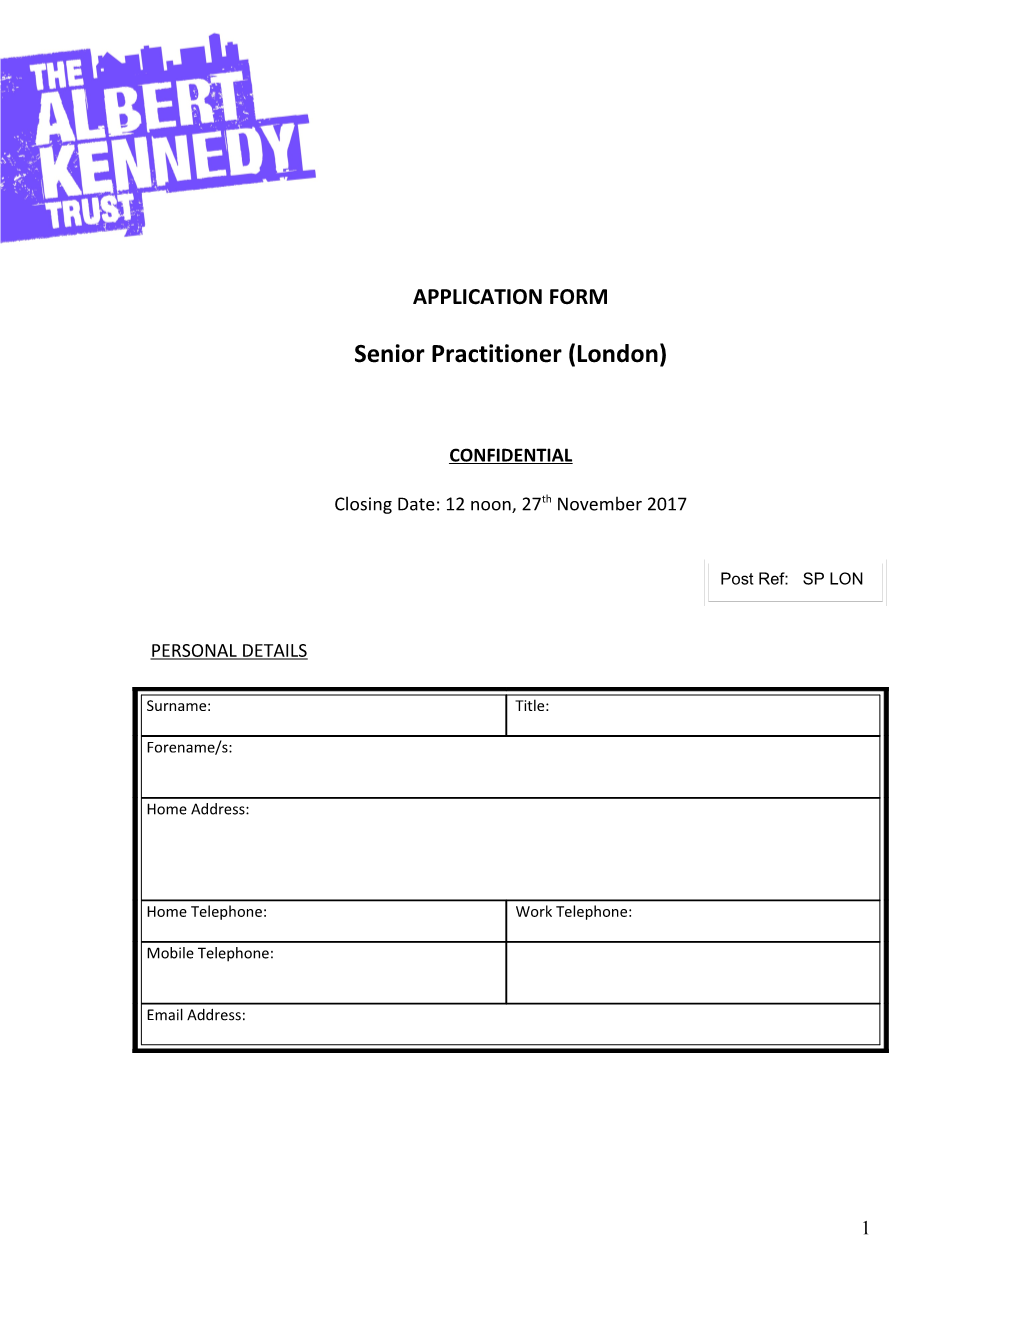 Application Form s80